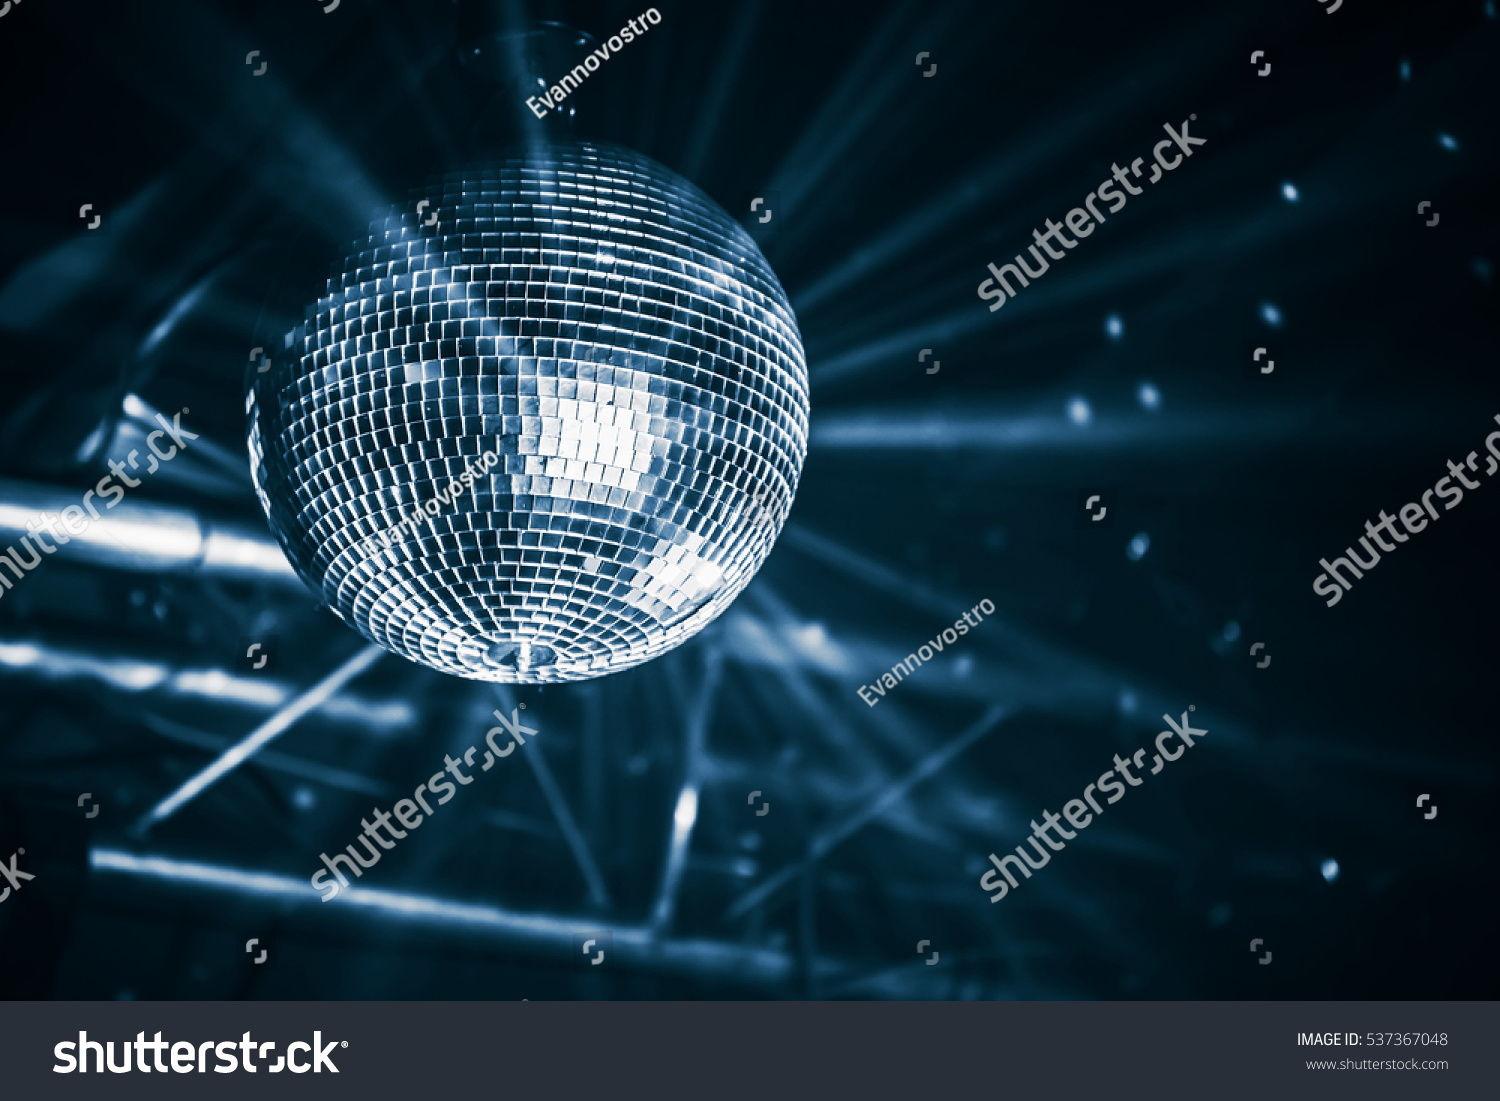 Disco ball with bright rays, blue toned night party background photo #537367048